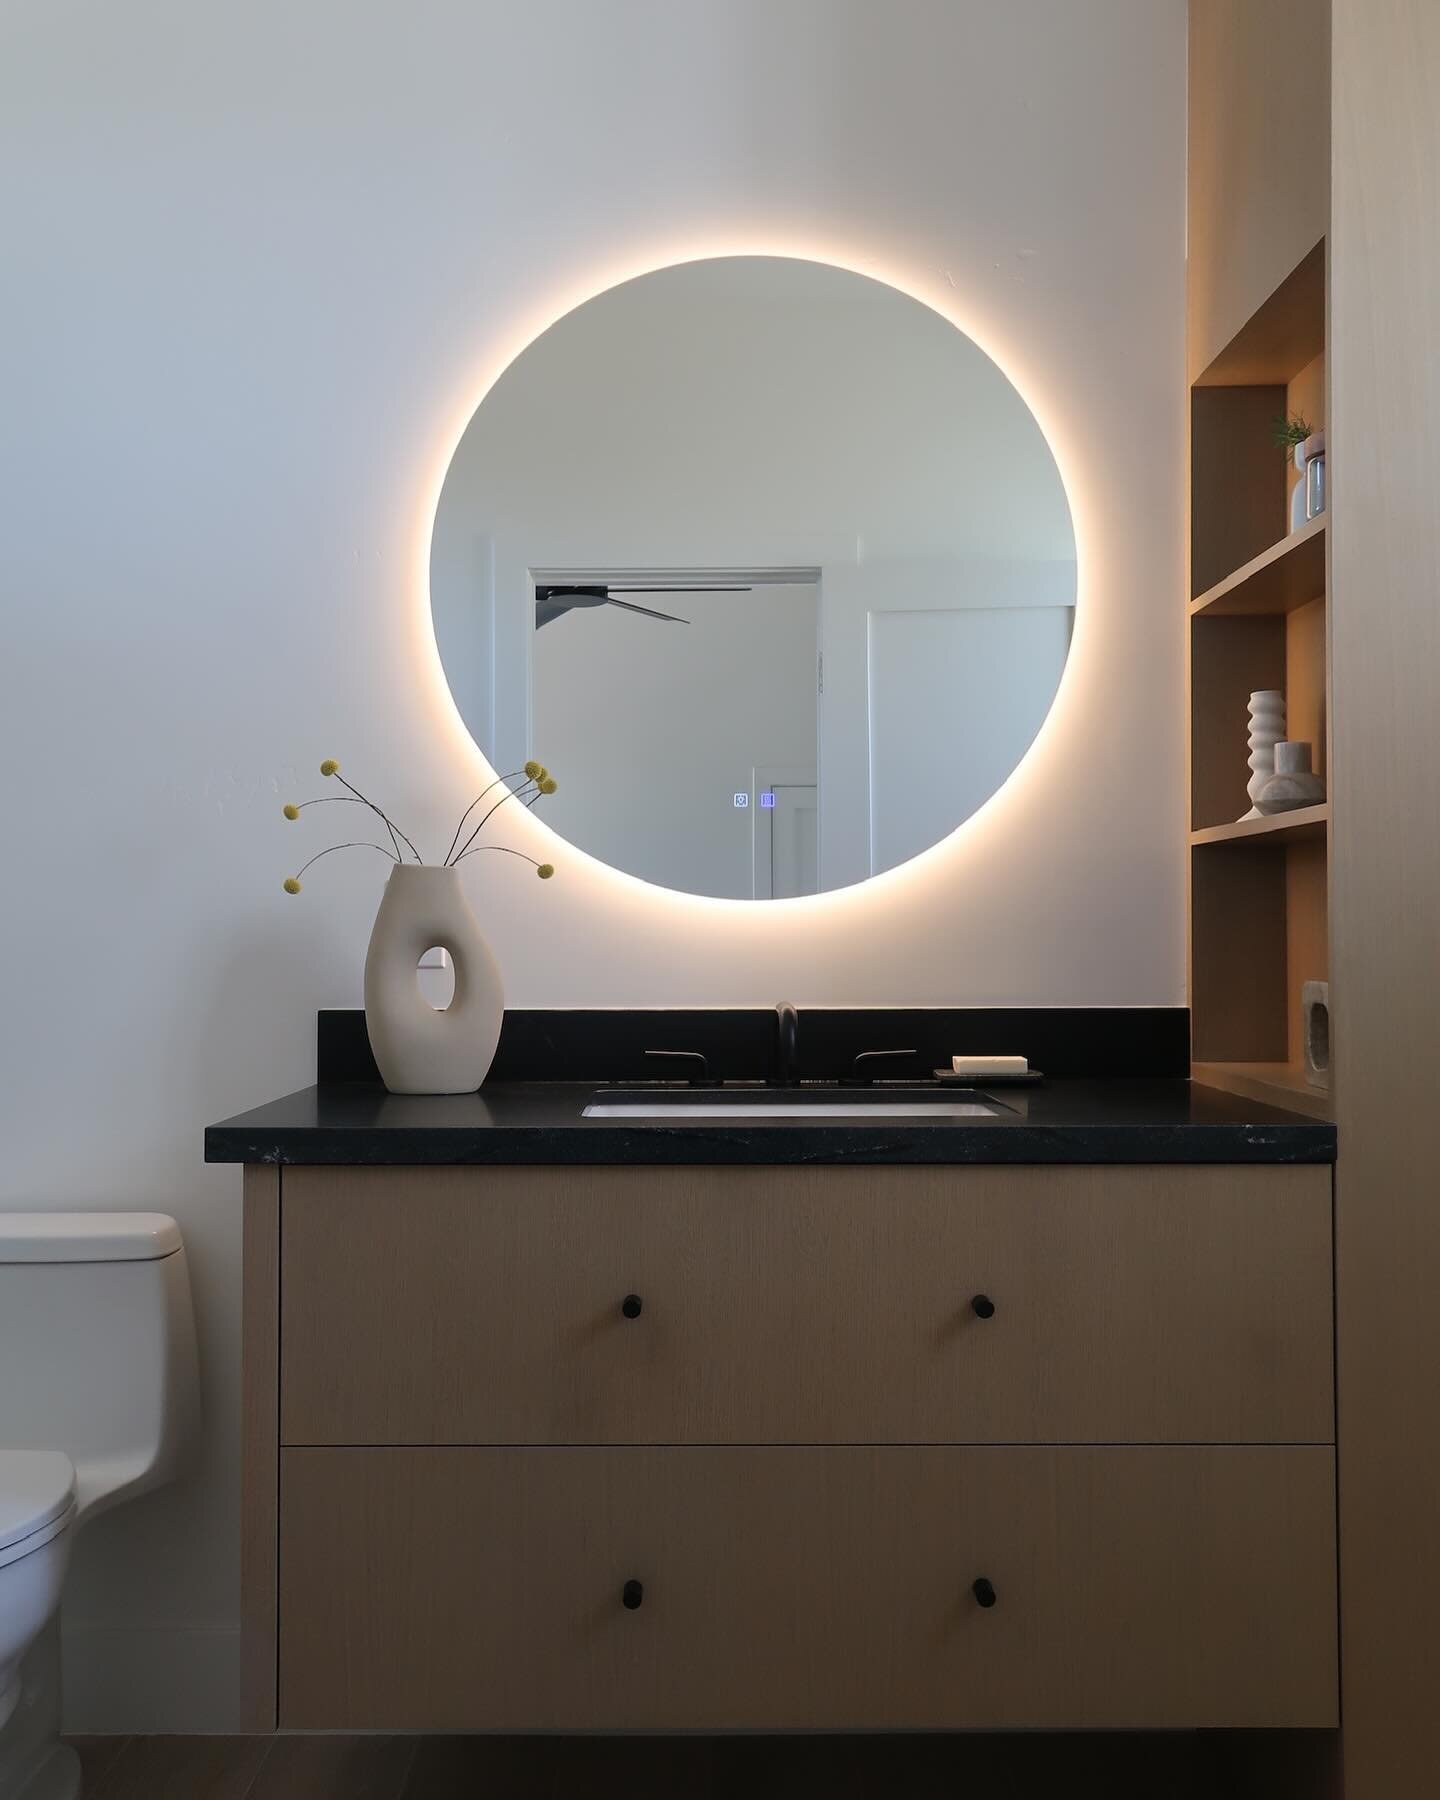 Beauty in simplicity 〰️ 

Presenting the guest bath at our #DownToEarth project. This bathroom has been completely transformed into a cozy retreat. Swipe to see the before!